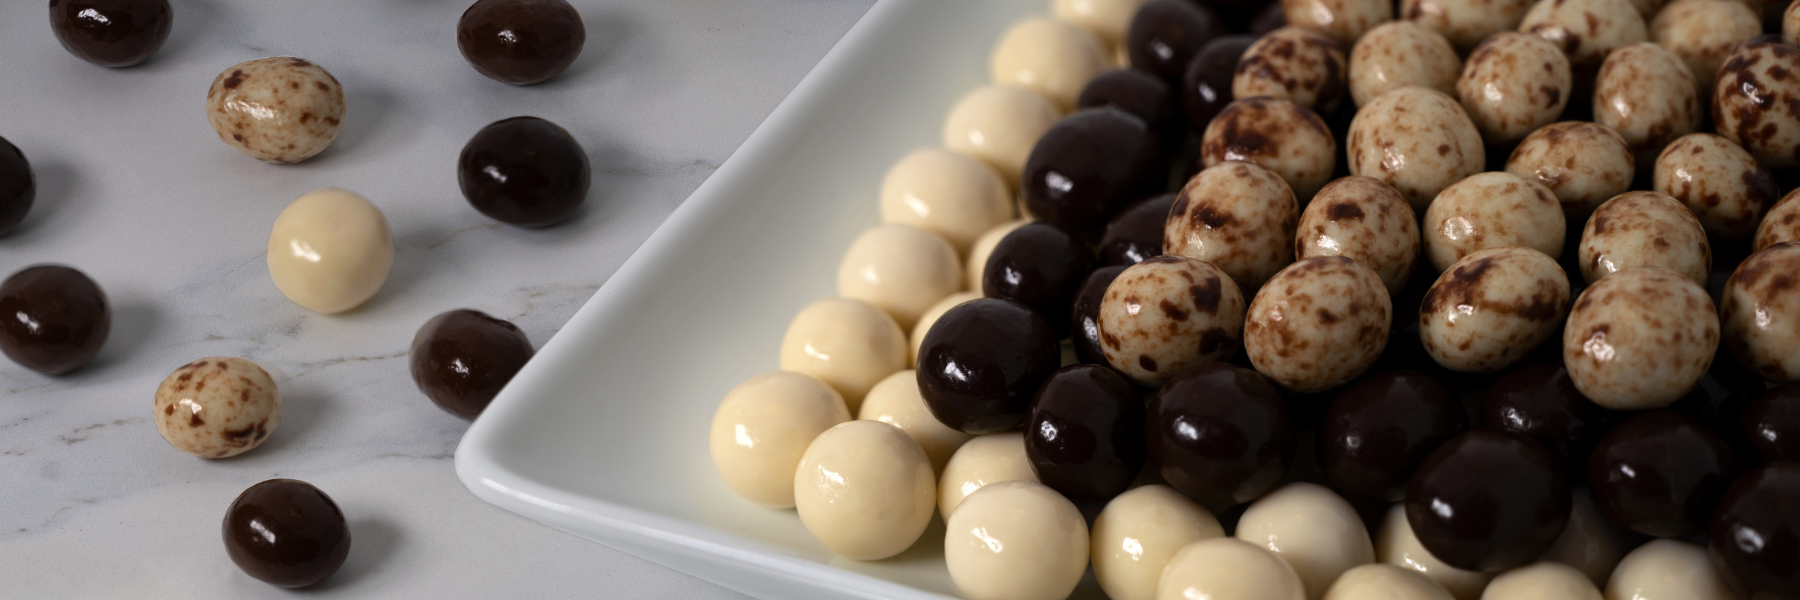 Dilettante Chocolate Plate of White, Dark, and Marbled Espresso Beans